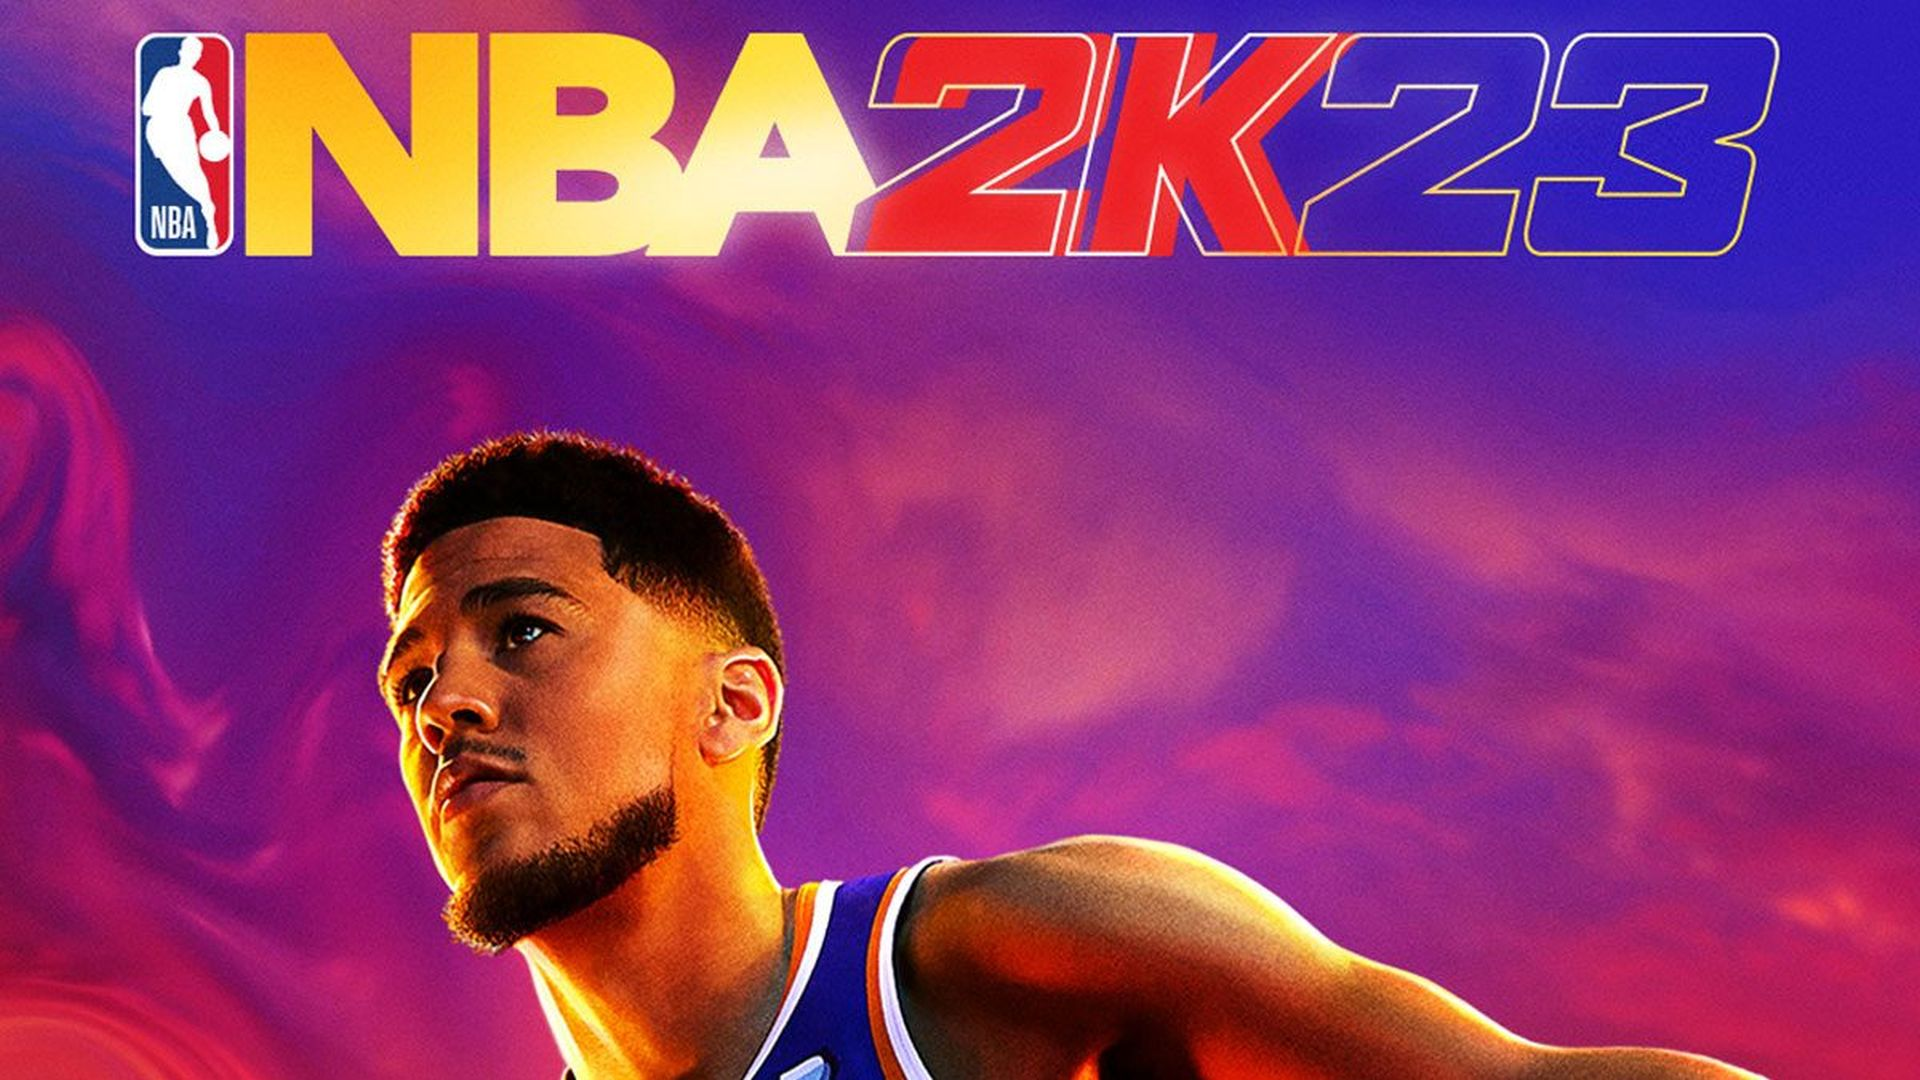 NBA 2k23 Latest News: 5 Indicators To Find Out Trash Players